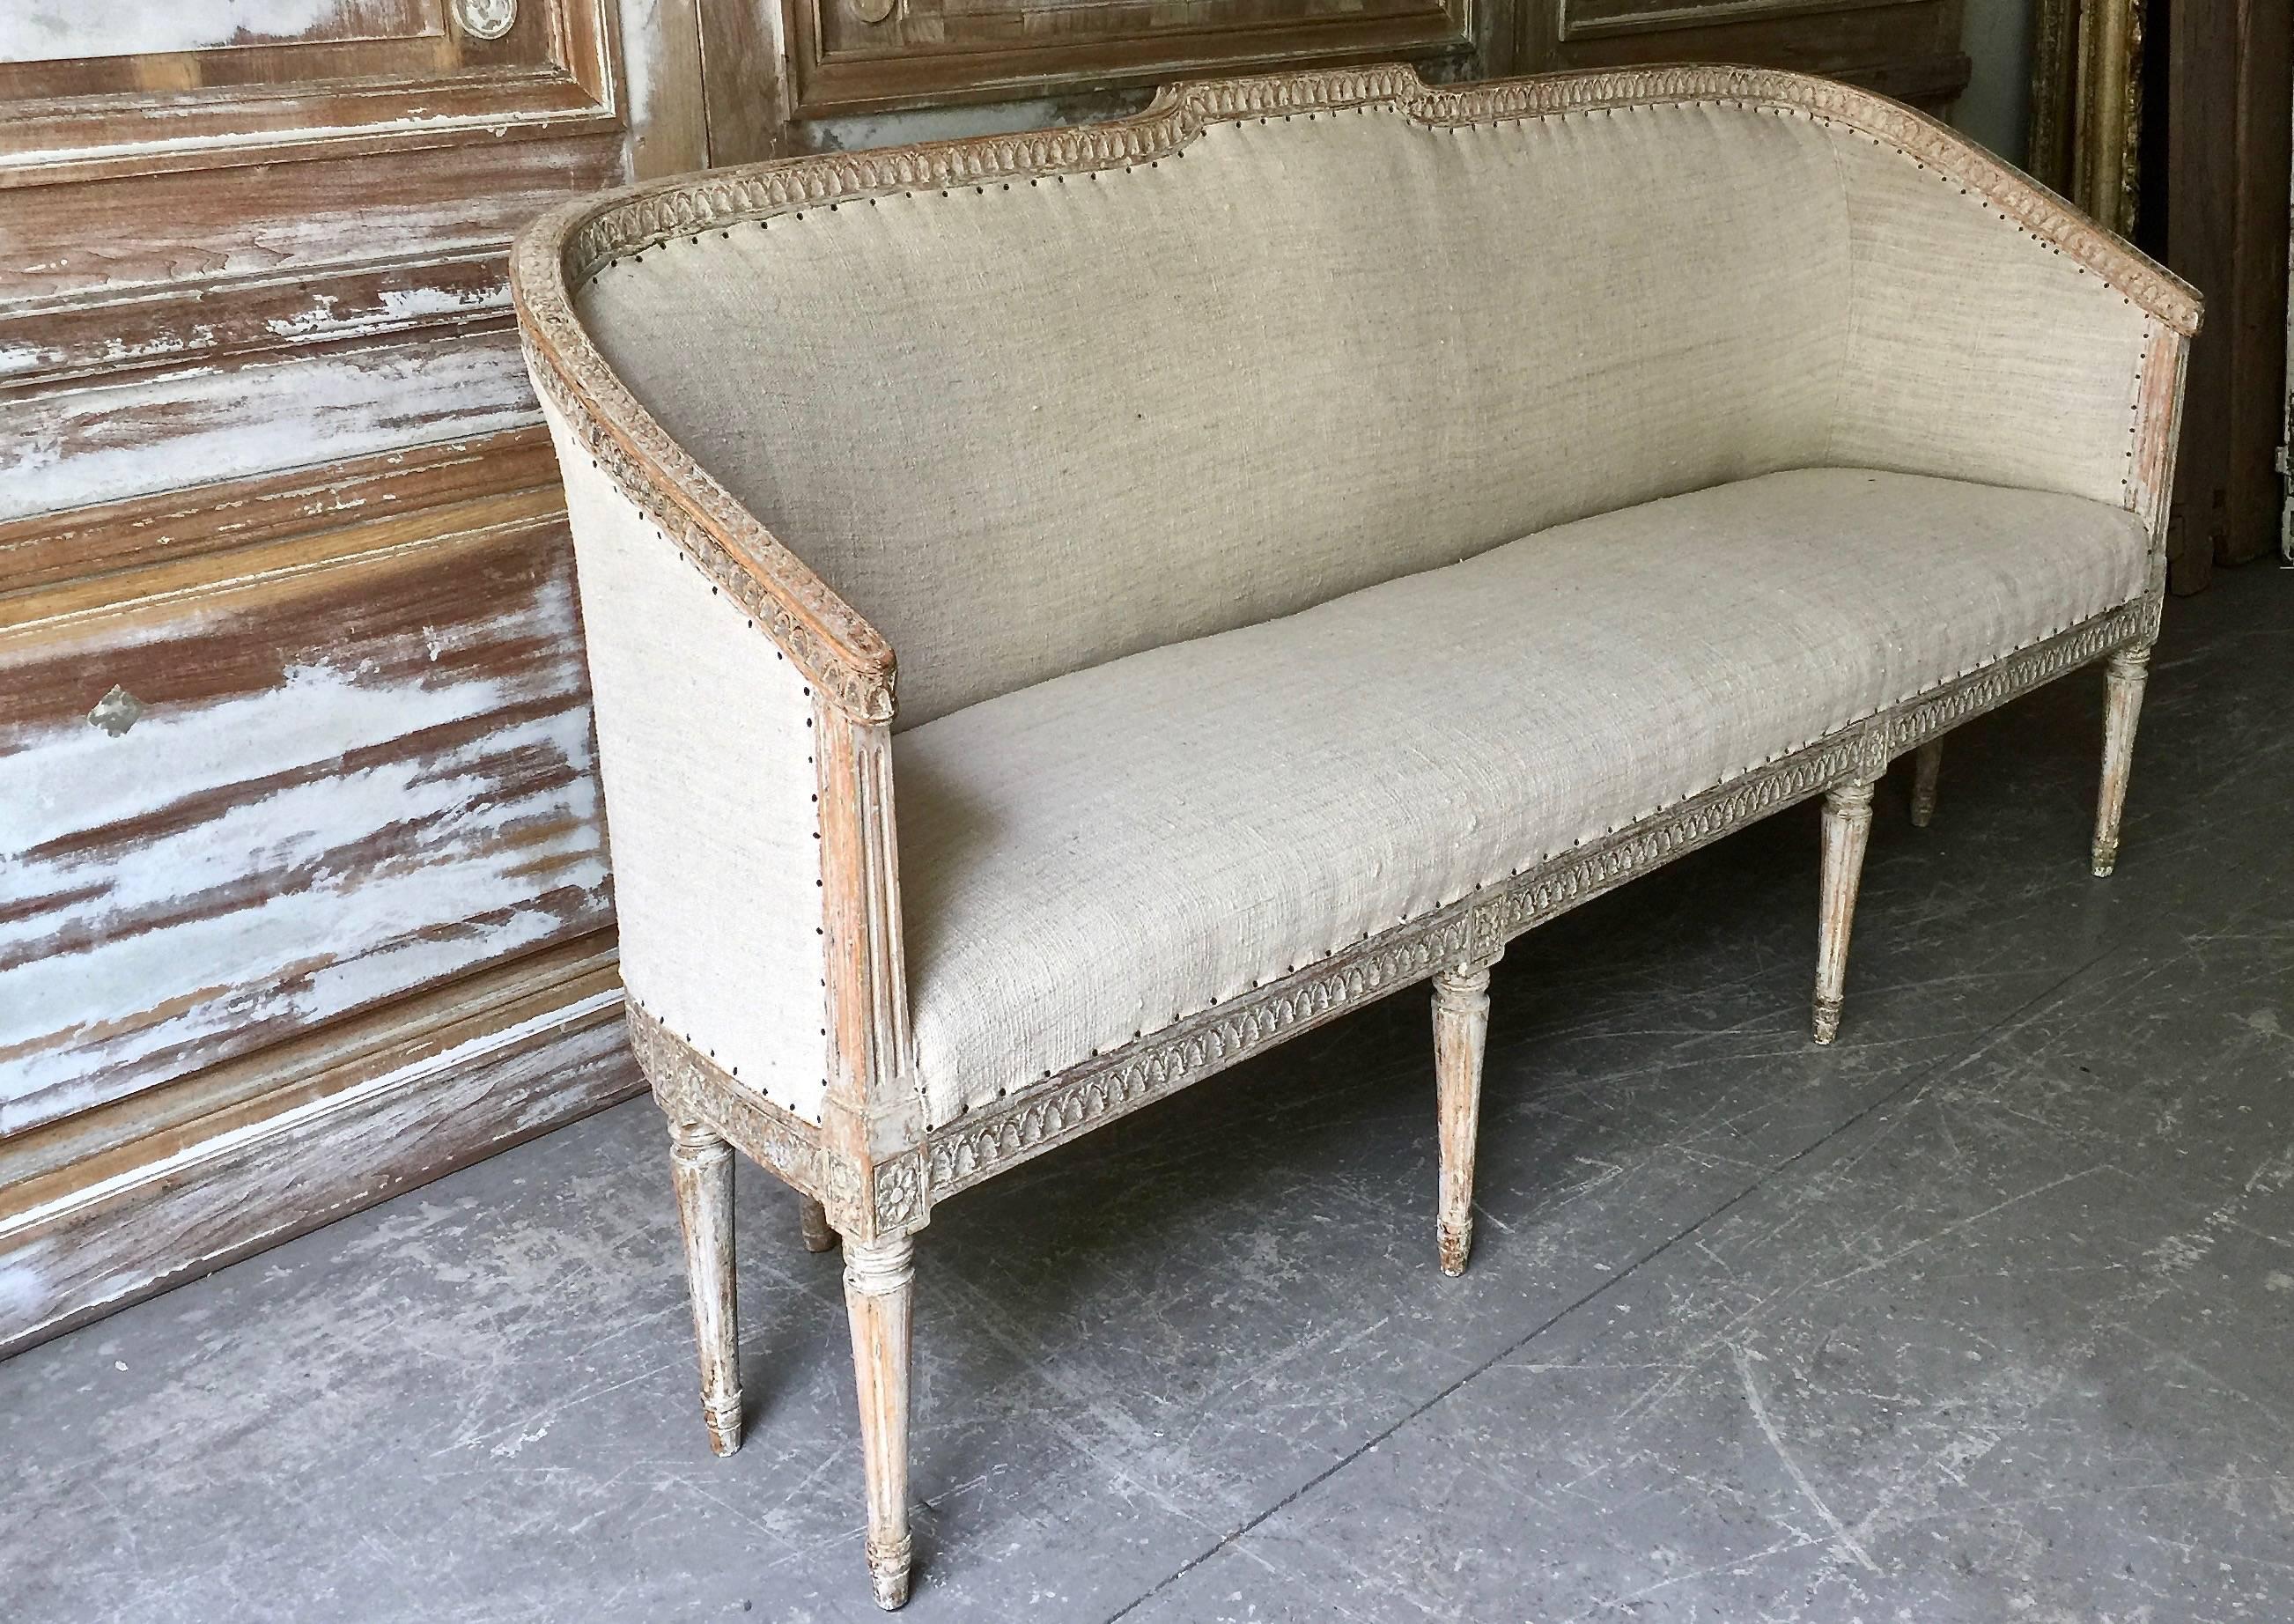 Magnificent Swedish Period Gustavian 18th century barrel back sofa settee with rounded form, rails richly carved in 